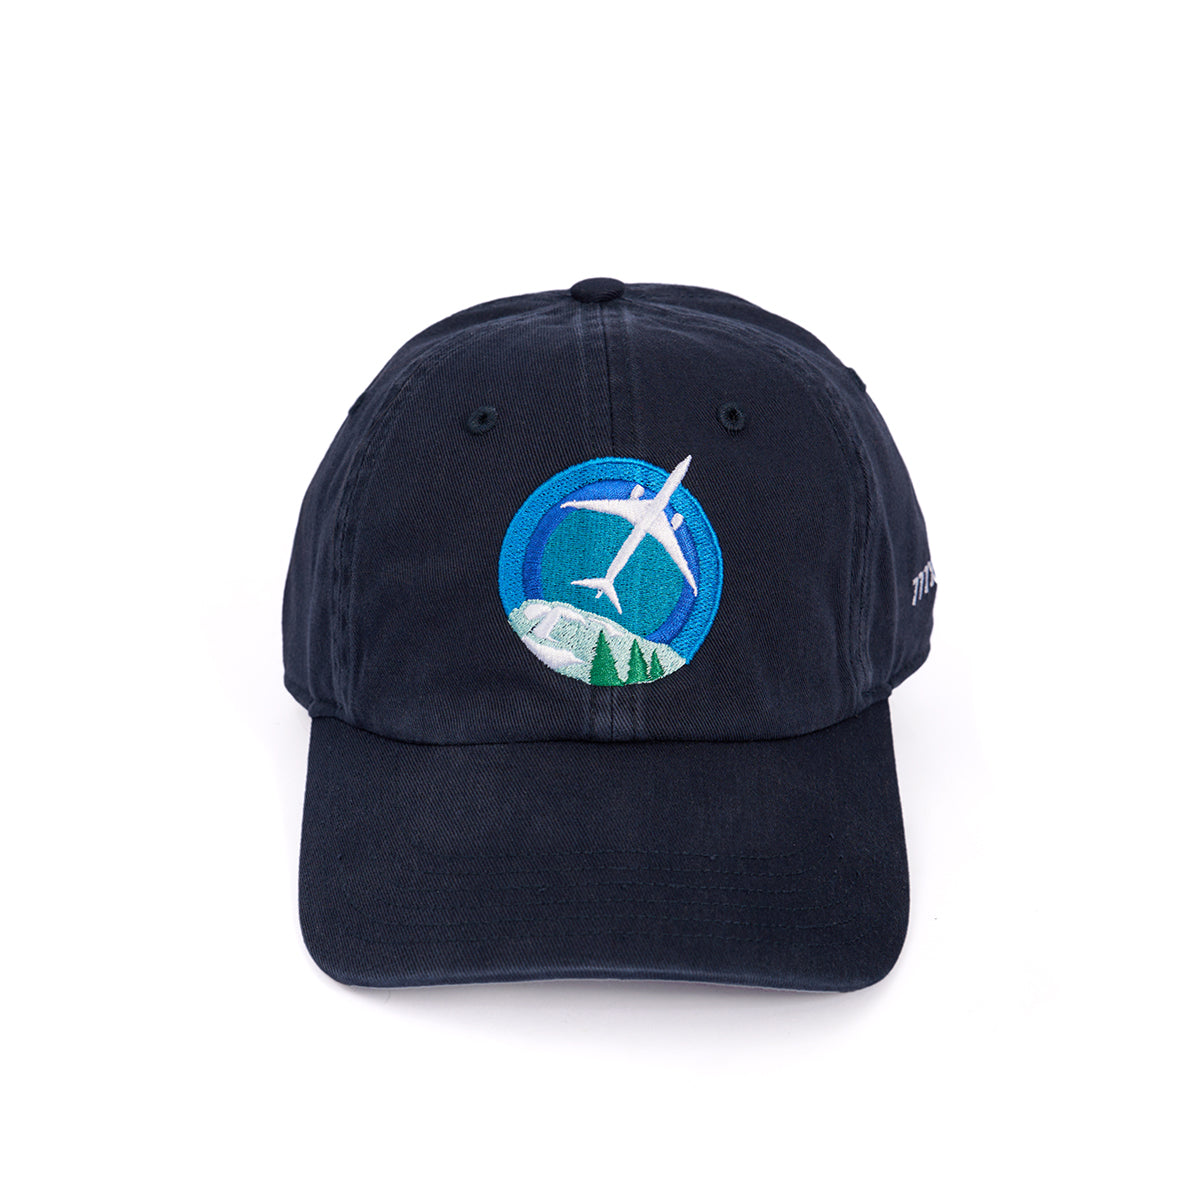 Skyward hat, featuring the iconic Boeing 777X embroidered in a roundel design on the front